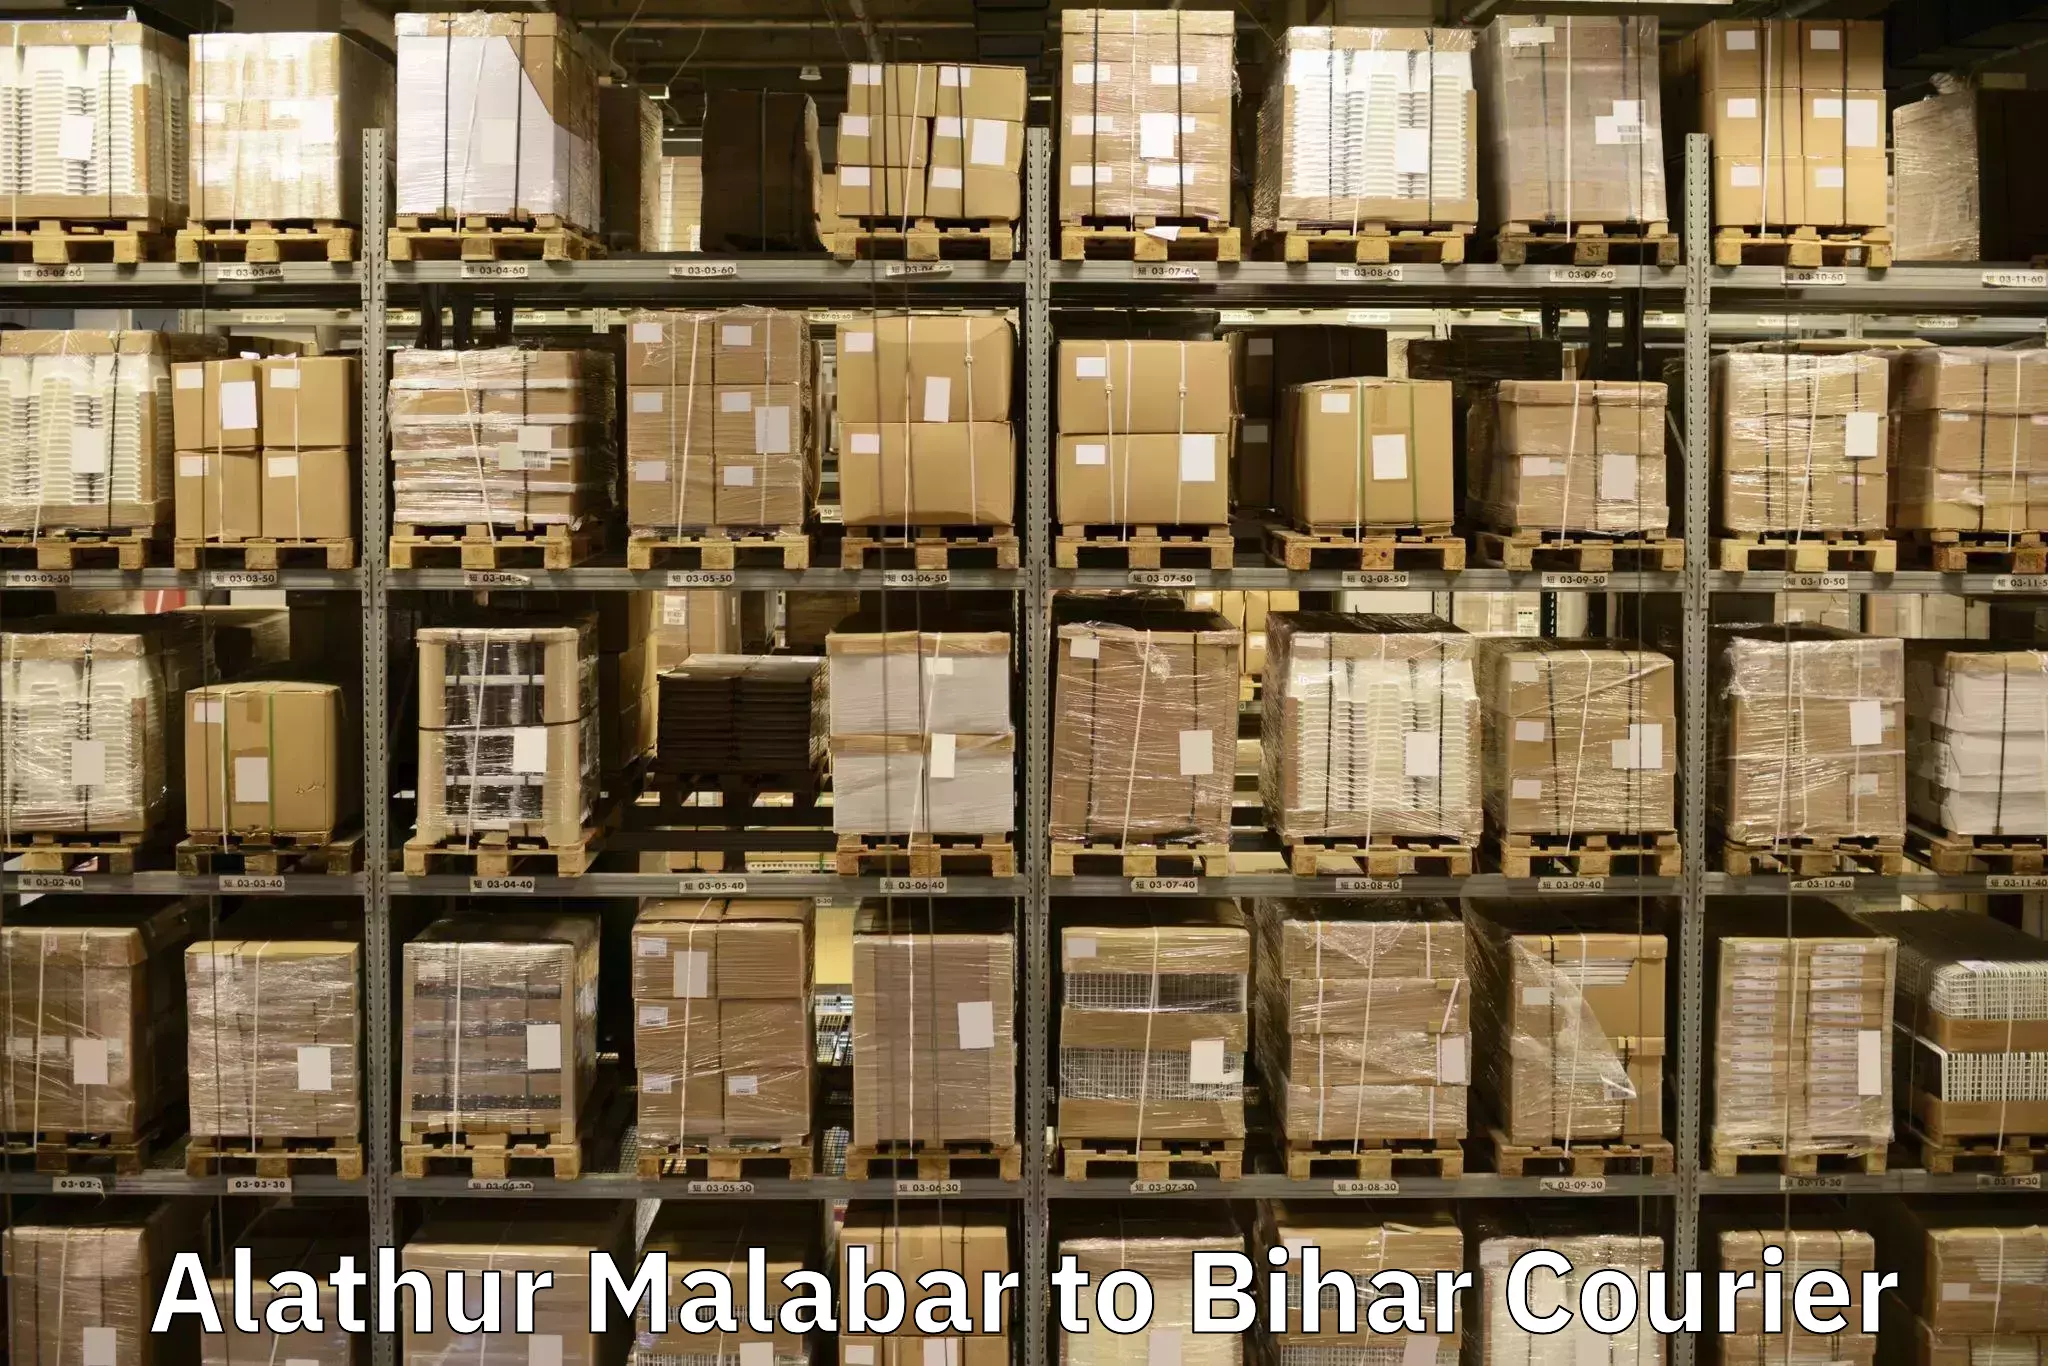 Furniture delivery service Alathur Malabar to East Champaran